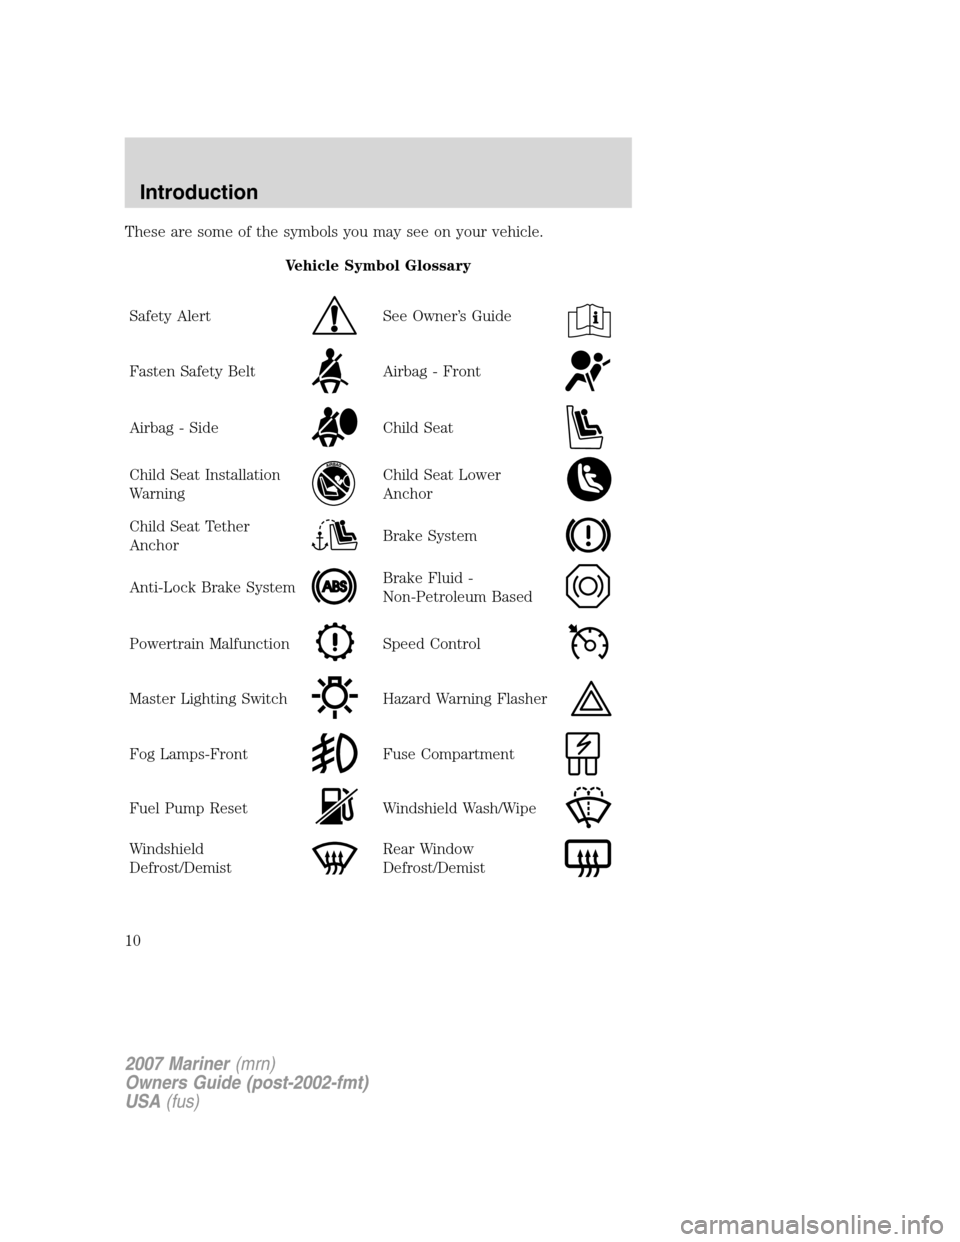 Mercury Mariner 2007  Owners Manuals These are some of the symbols you may see on your vehicle.
Vehicle Symbol Glossary
Safety Alert
See Owner’s Guide
Fasten Safety BeltAirbag - Front
Airbag - SideChild Seat
Child Seat Installation
War